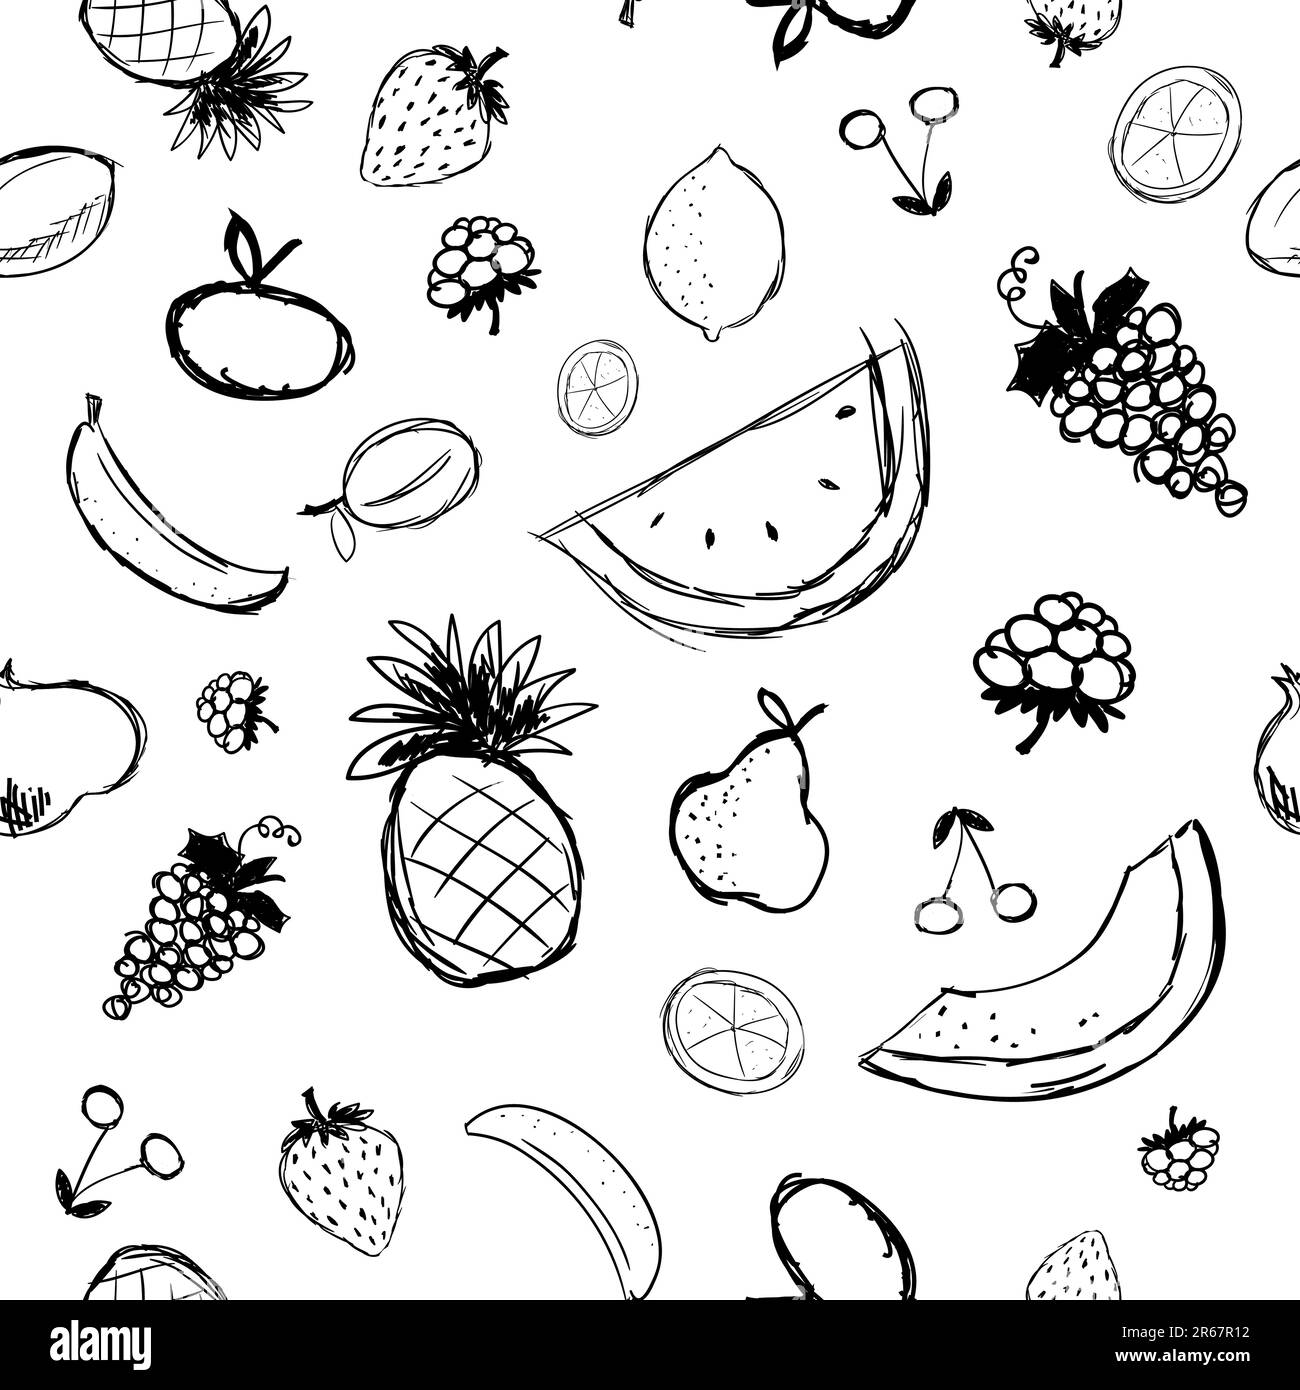 Fruits and berries sketch, seamless background for your design Stock Vector